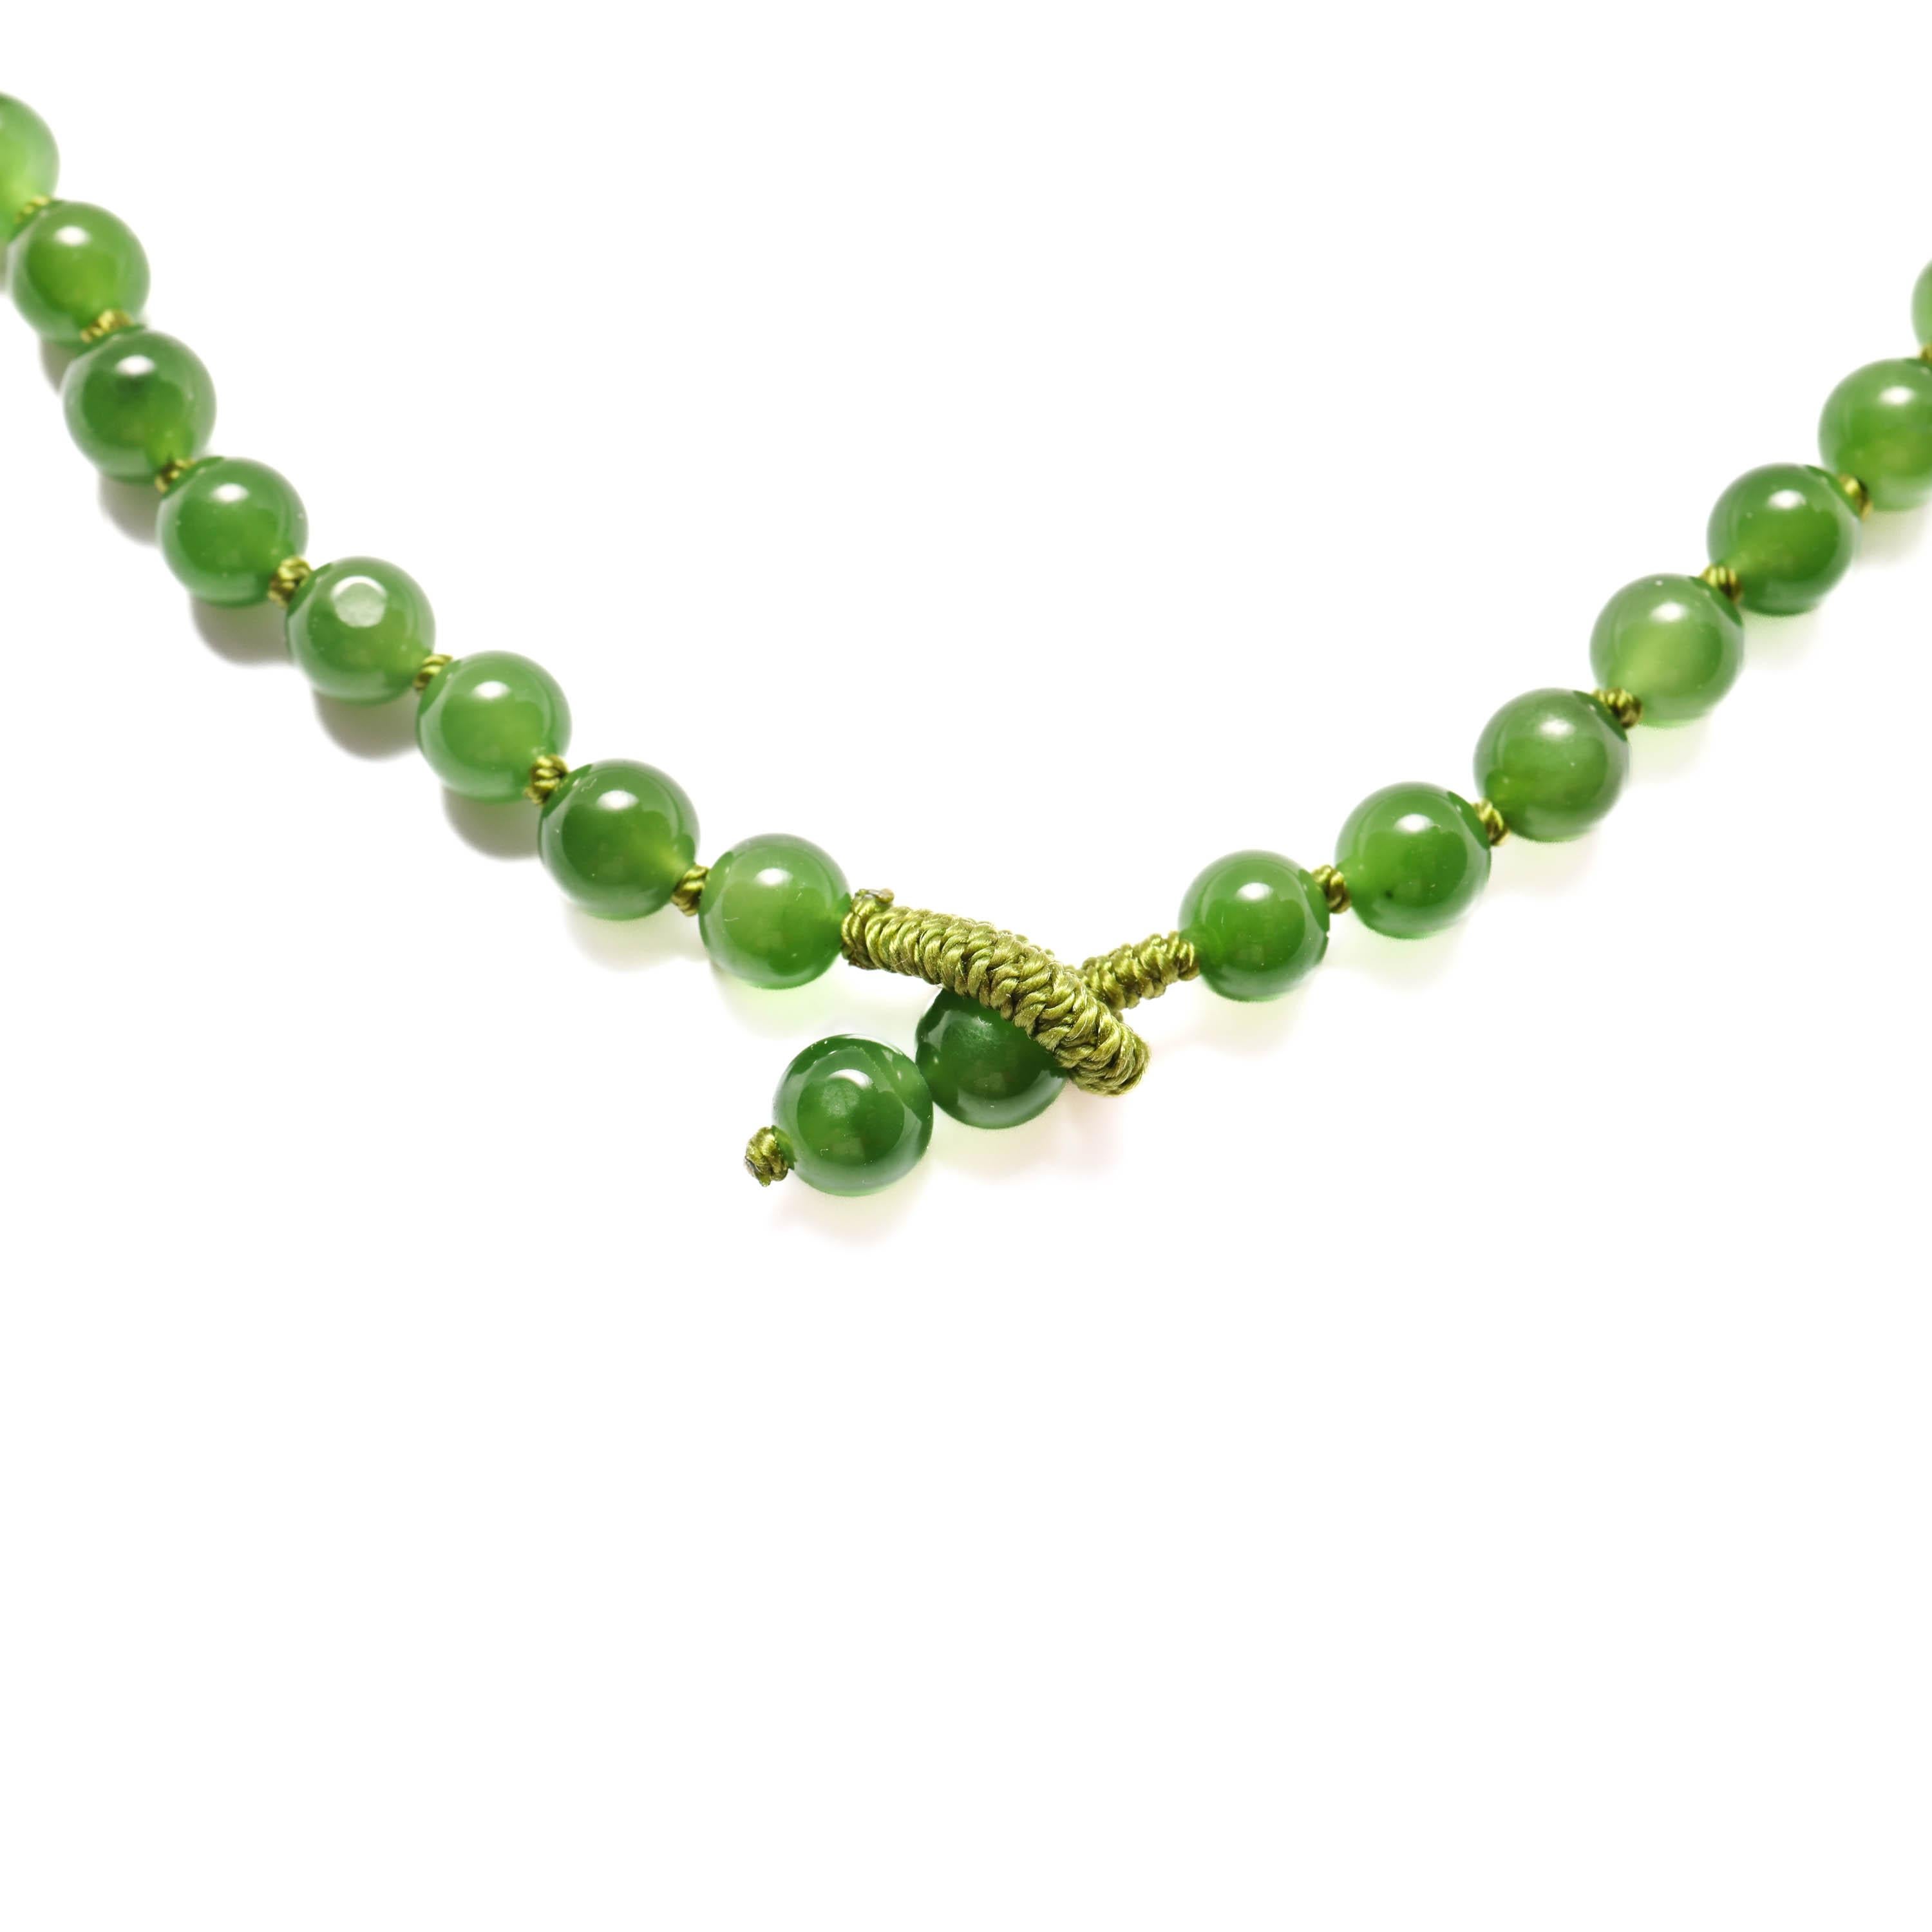 Bead Fine Nephrite Jade Necklace Hand Crafted Certified Untreated For Sale